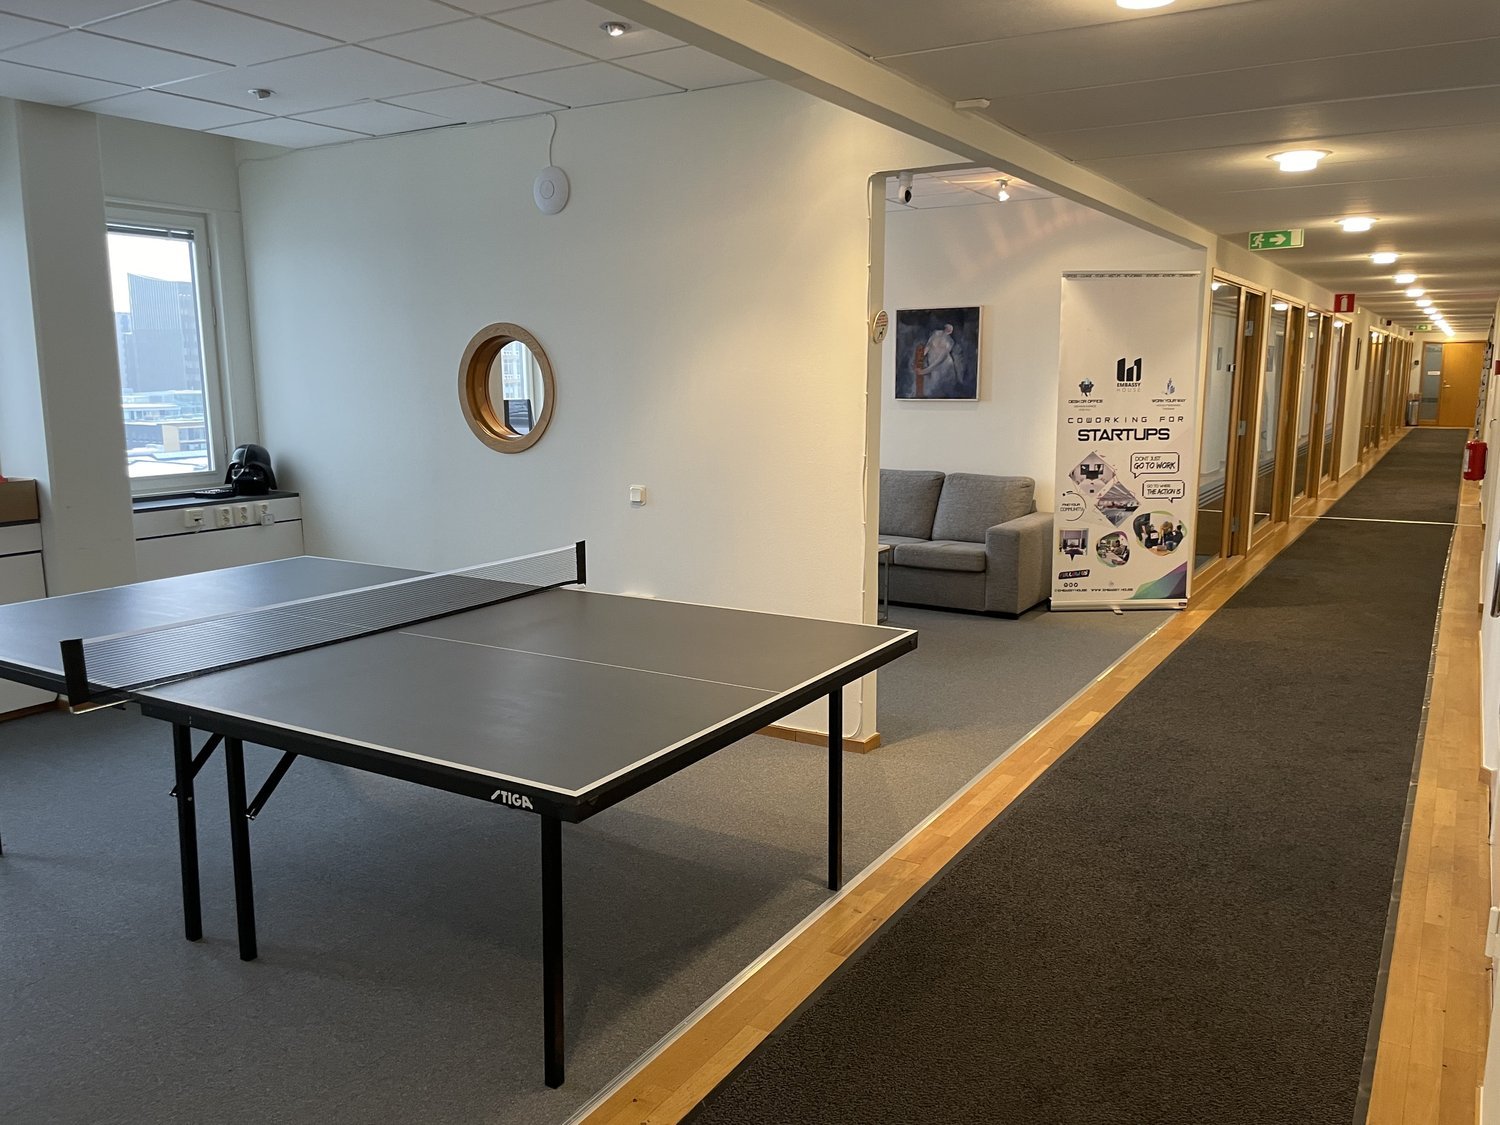 A pingpong table in an open office space